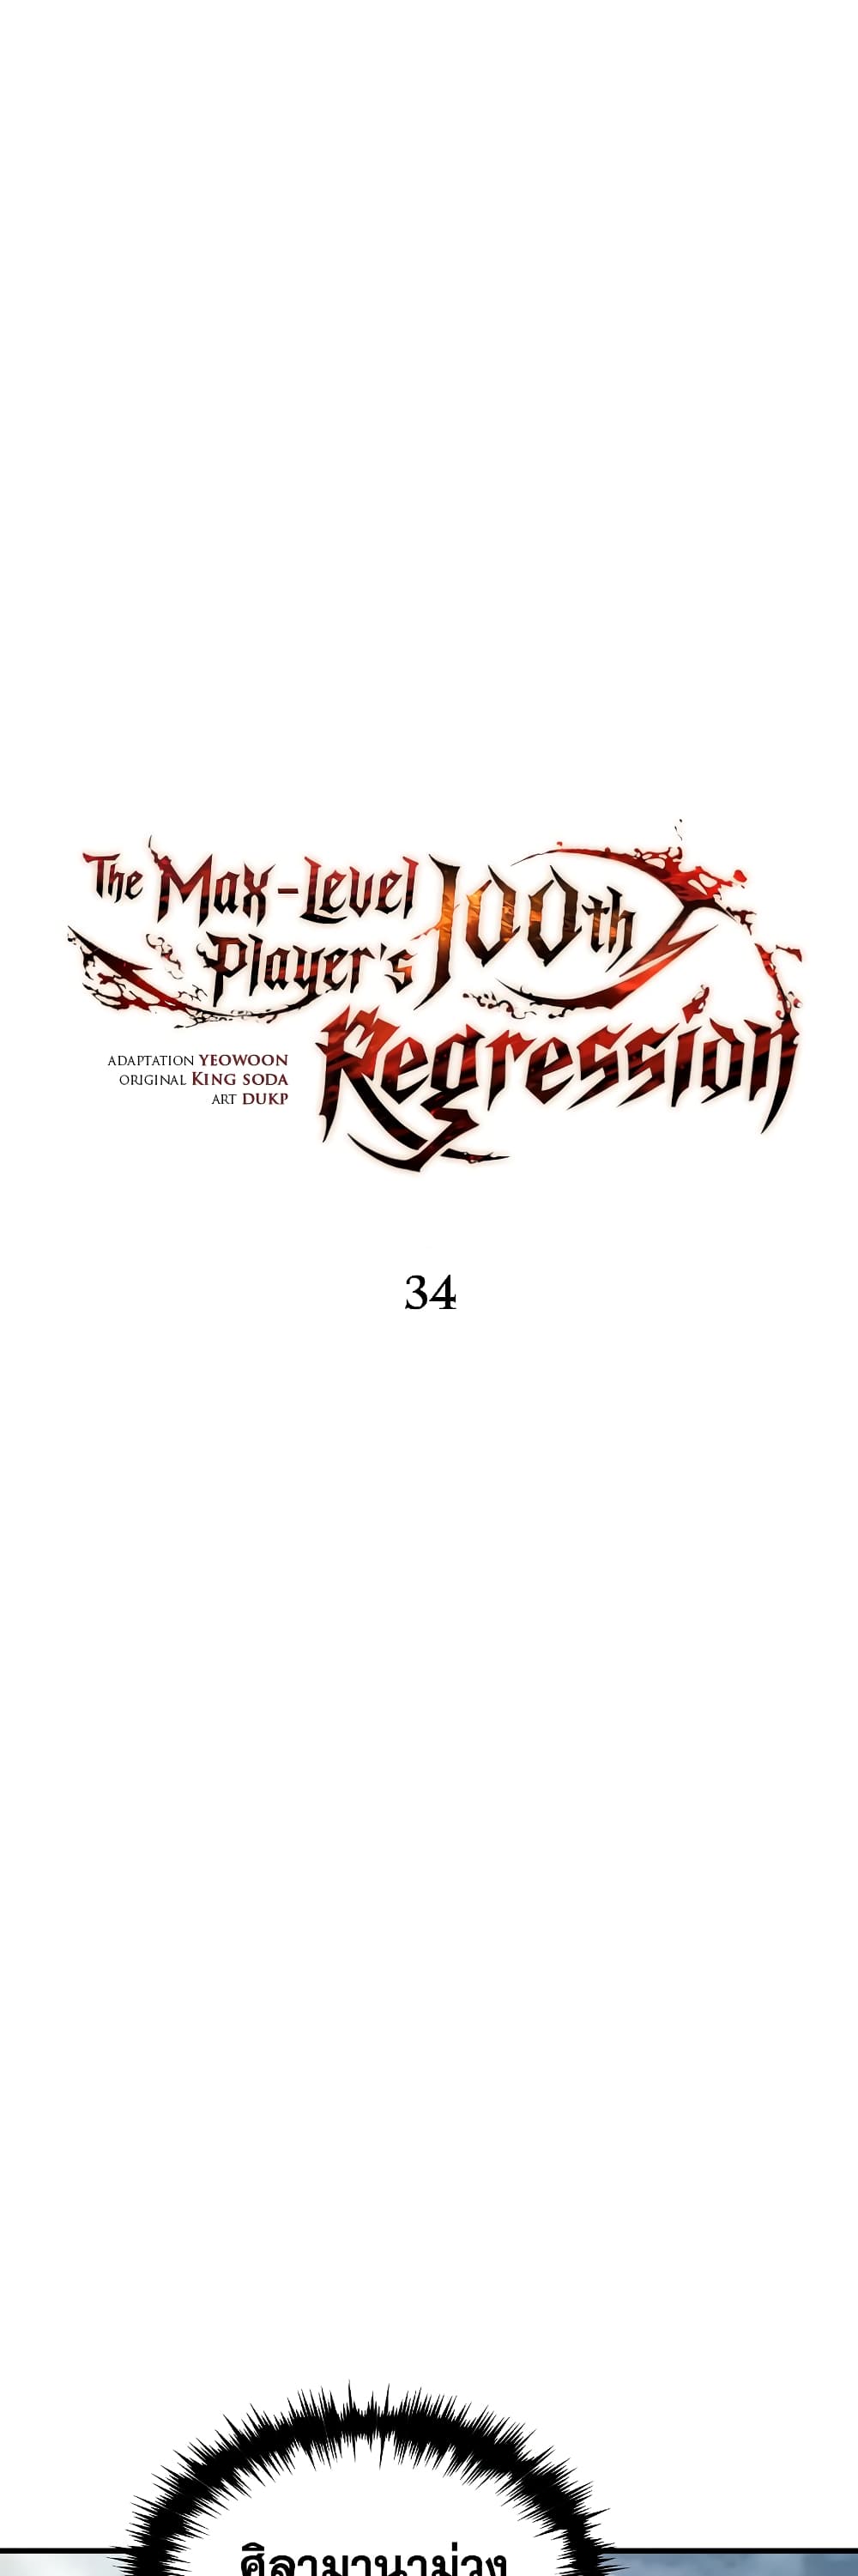 The 100th Regression of the Max-Level Player 34-34